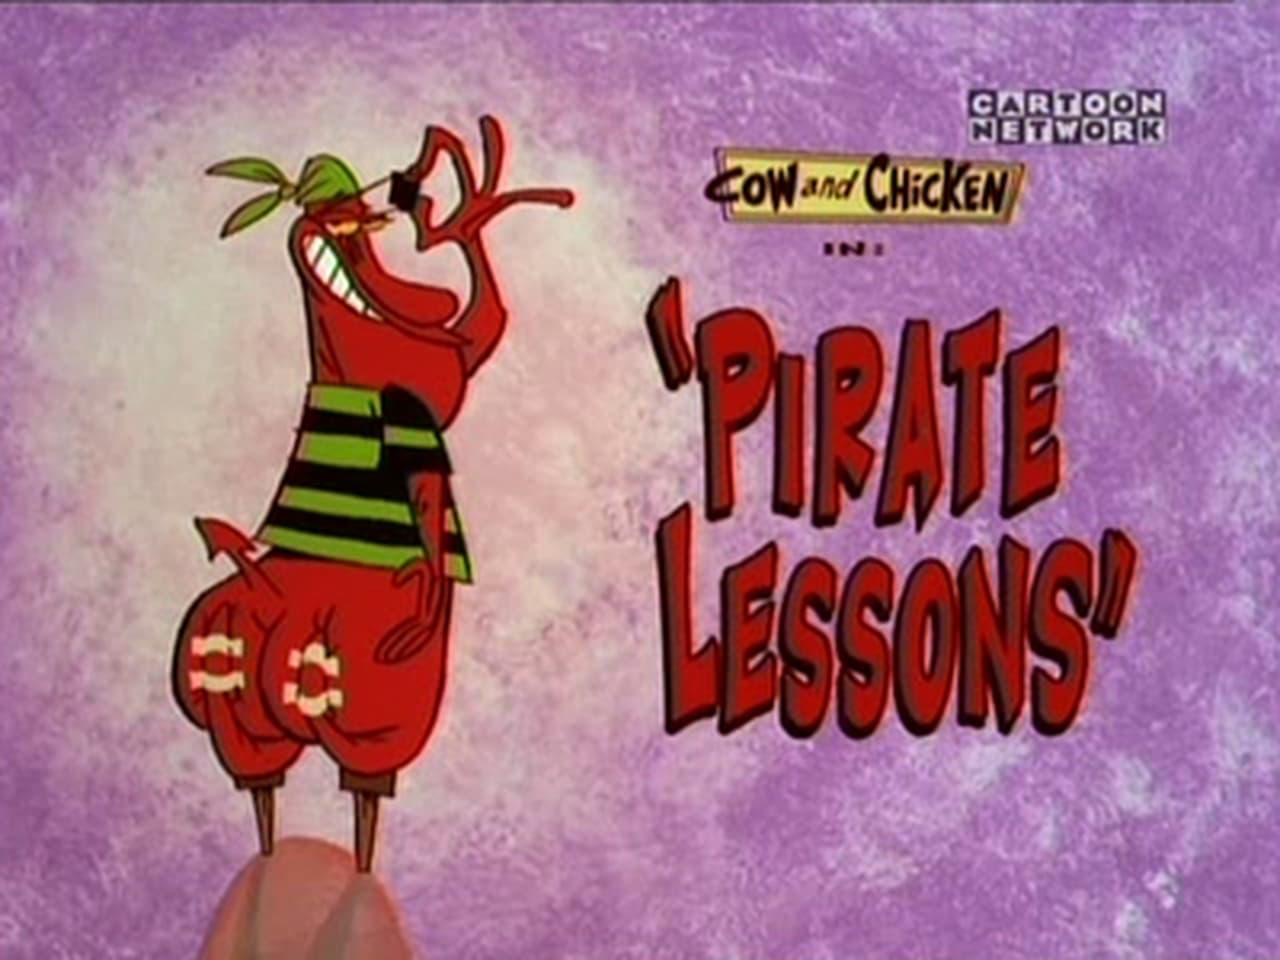 Cow and Chicken - Season 2 Episode 3 : Pirate Lessons